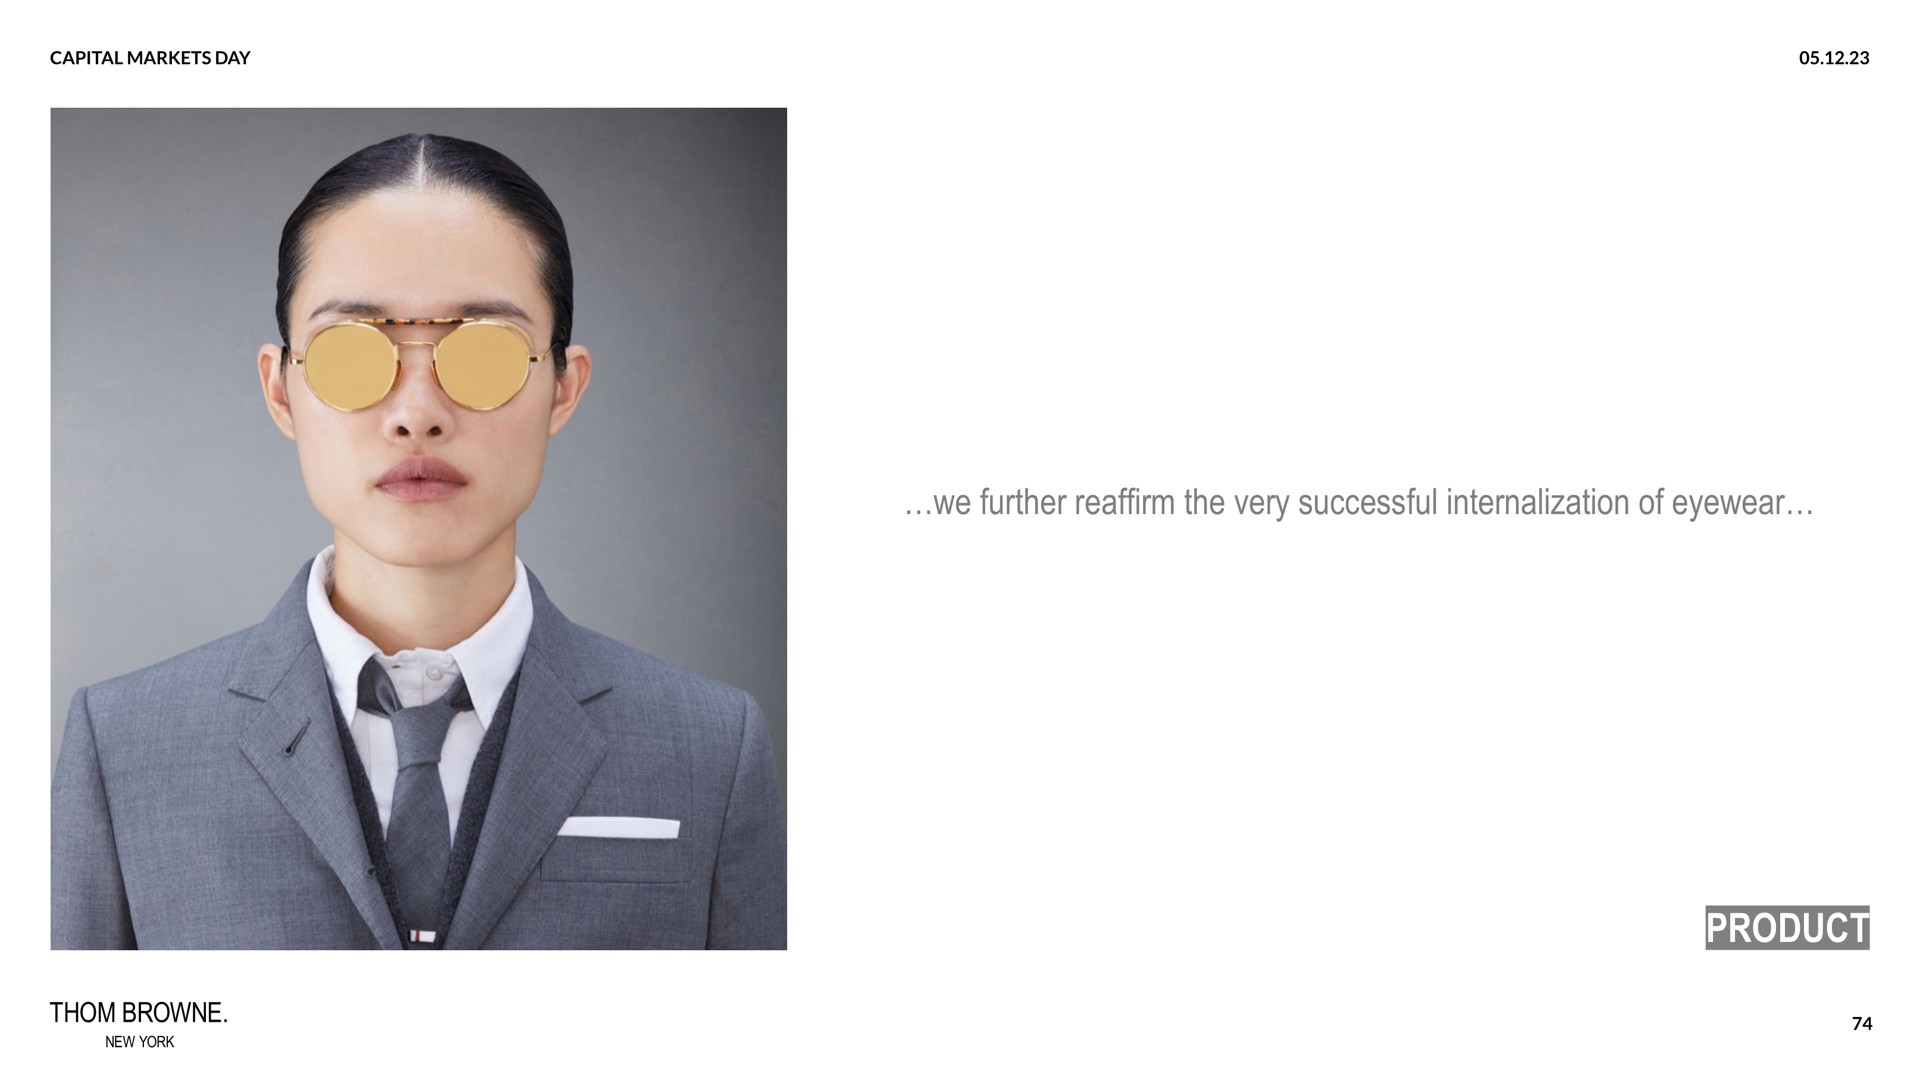 we further reaffirm the very successful internalization of eyewear we further reaffirm the very successful internalization of eyewear product product | Zegna